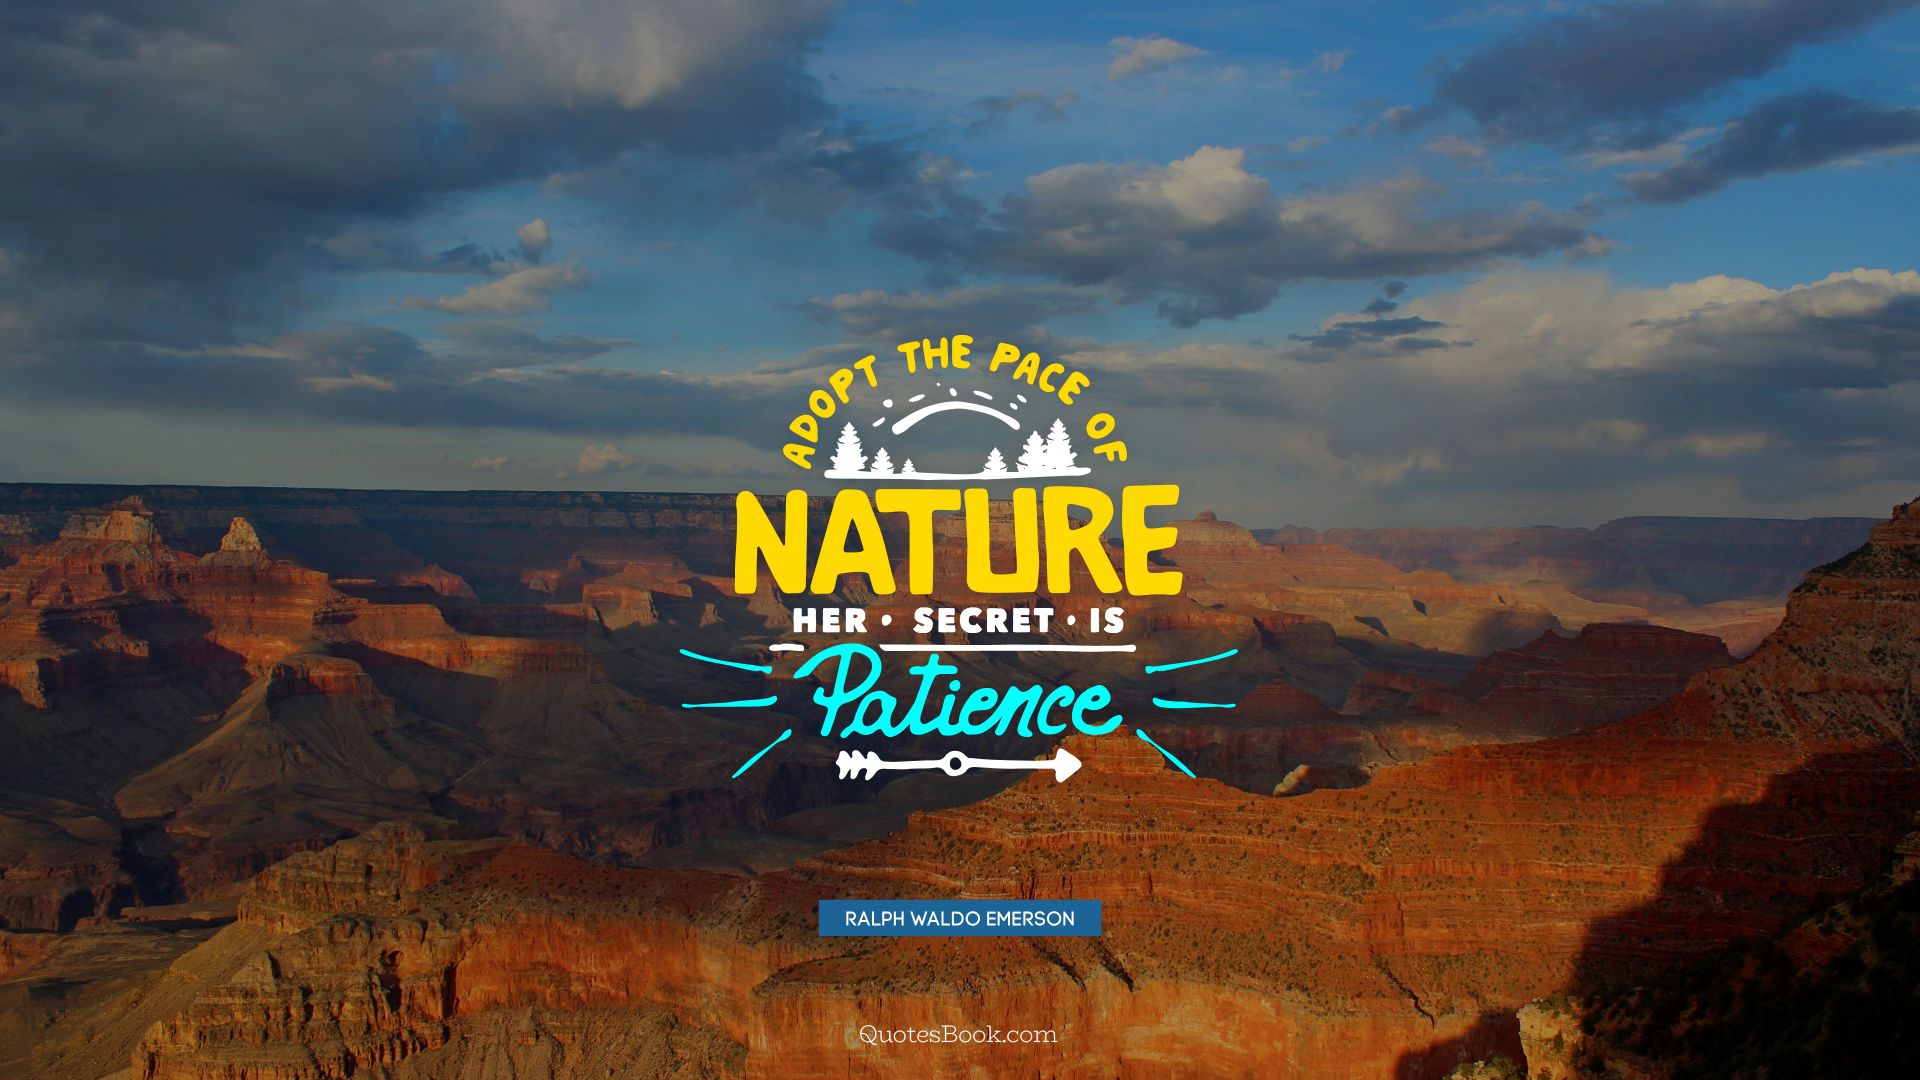 Adopt the pace of nature her secret is patience. - Quote by Ralph Waldo Emerson